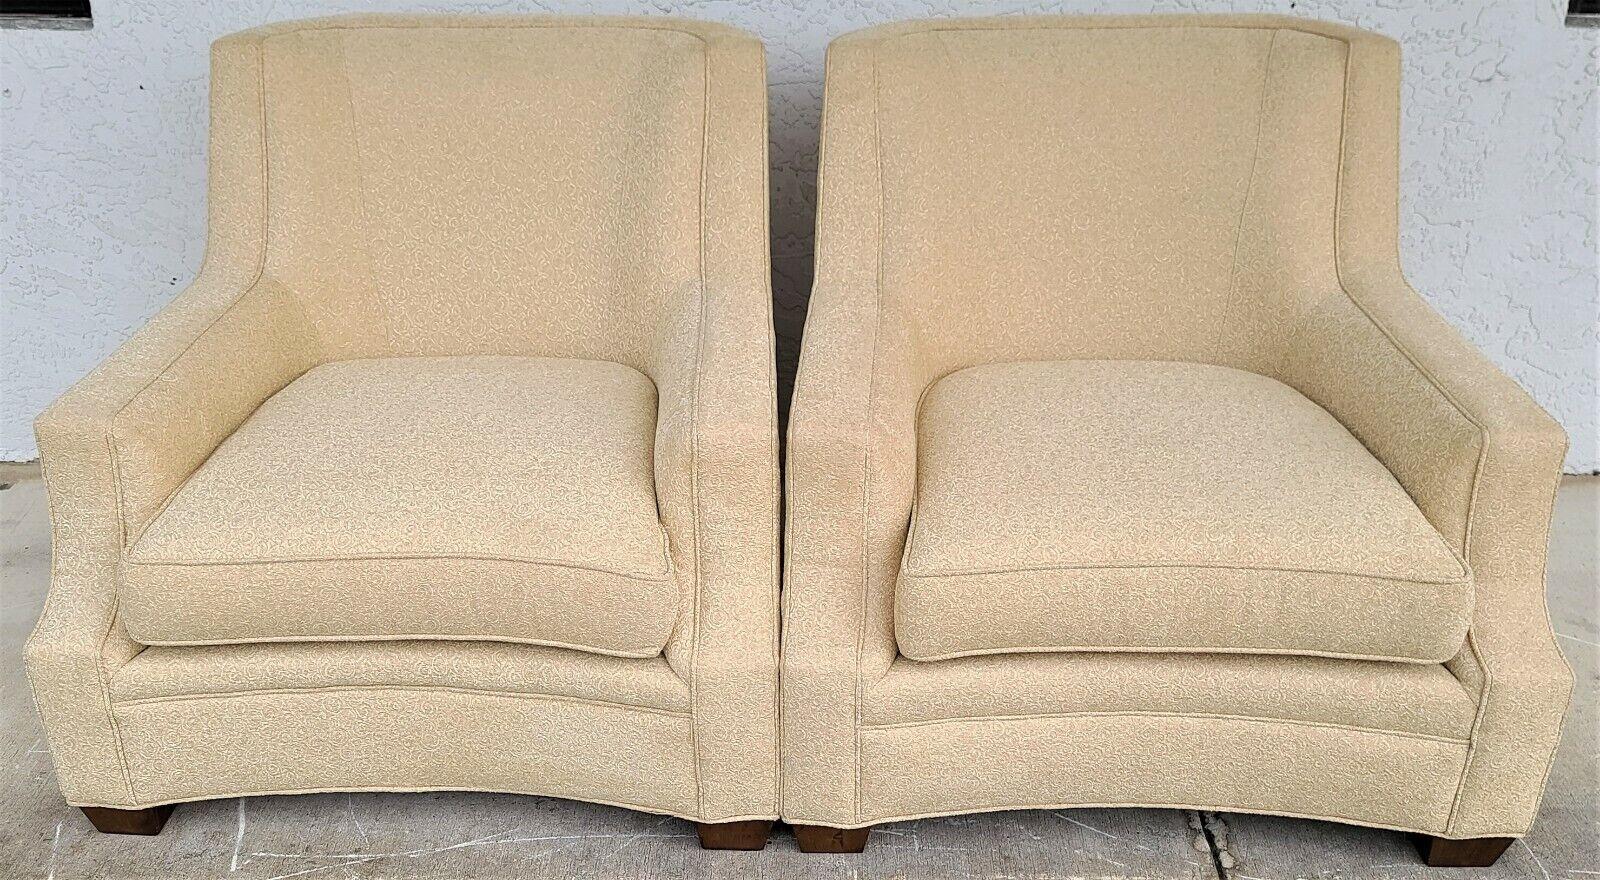 20th Century Art Deco Lounge Chairs by Century Furniture For Sale